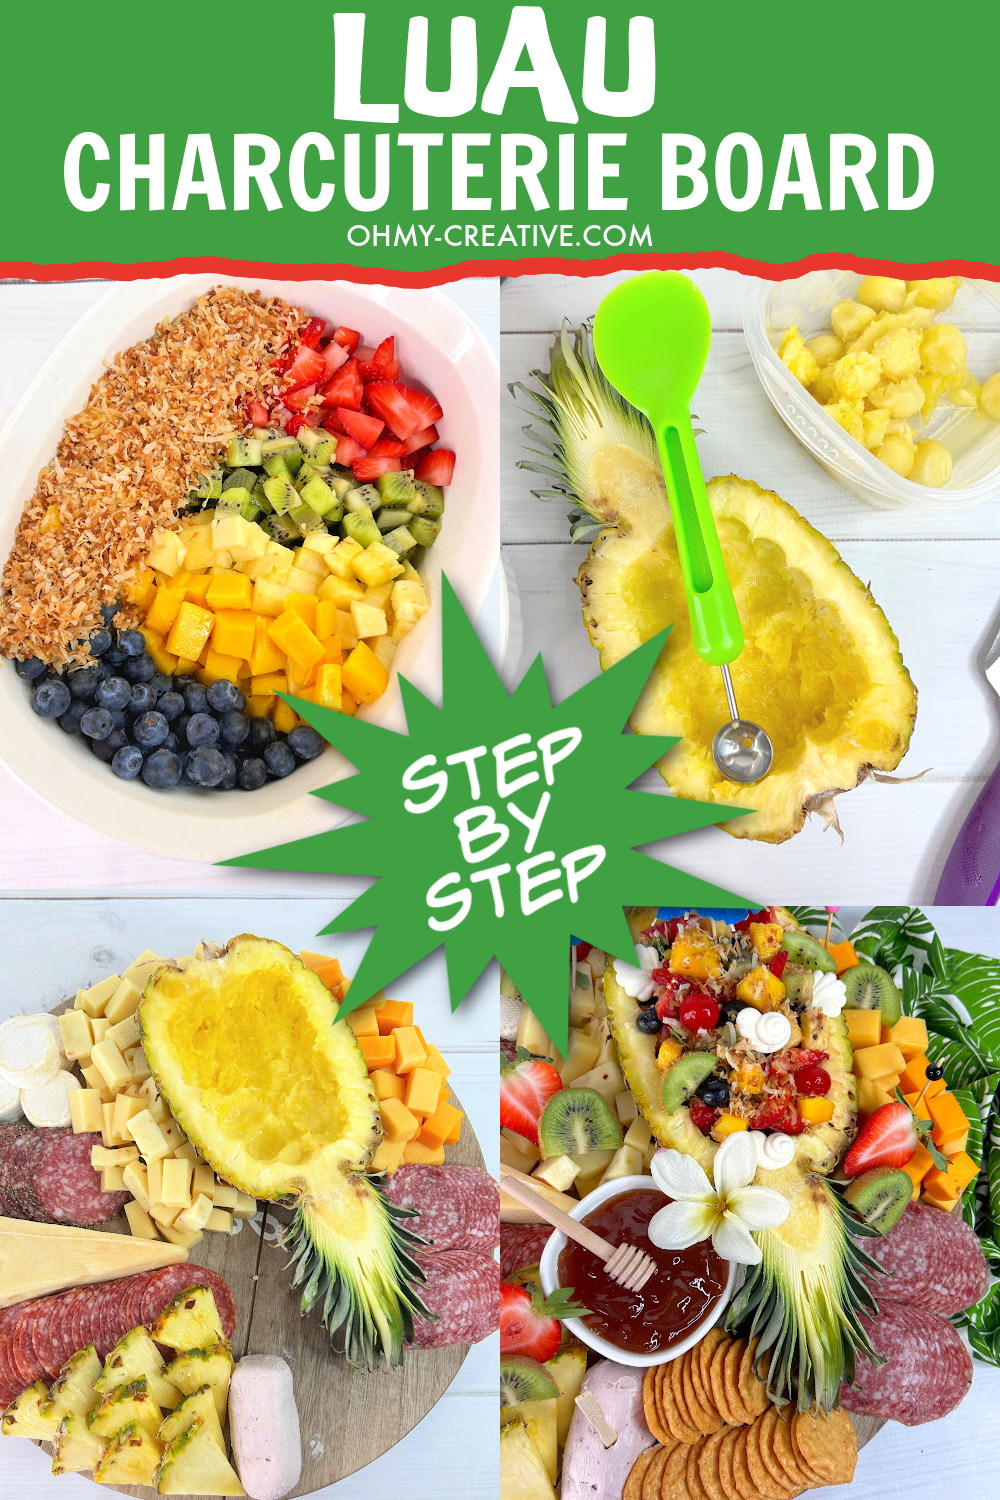 Do you want a simple snack? This Luau Charcuterie Board is the best! Great flavors - no cooking required! Learn how to make a luau charcuterie board step by step.